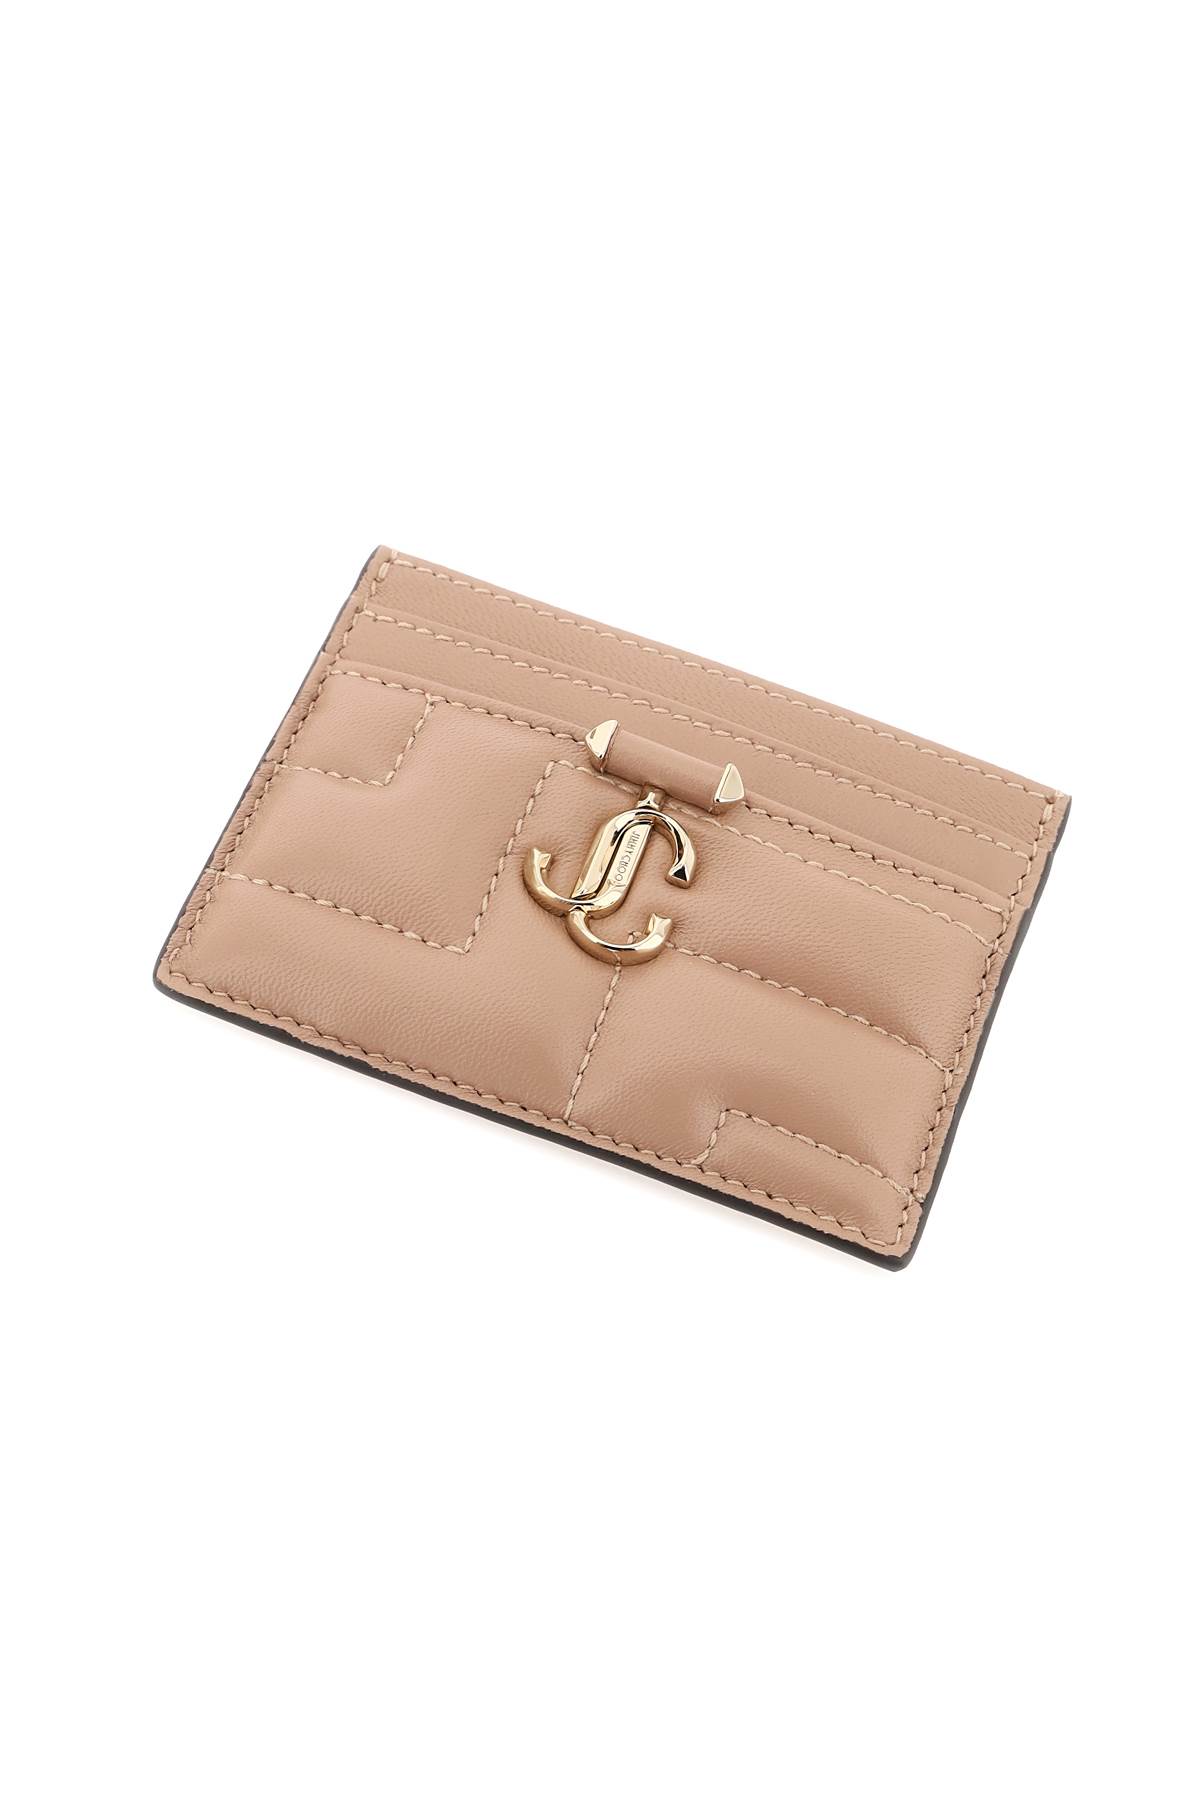 Shop Jimmy Choo Quilted Nappa Leather Card Holder In Ballet Pink Light Gold (pink)